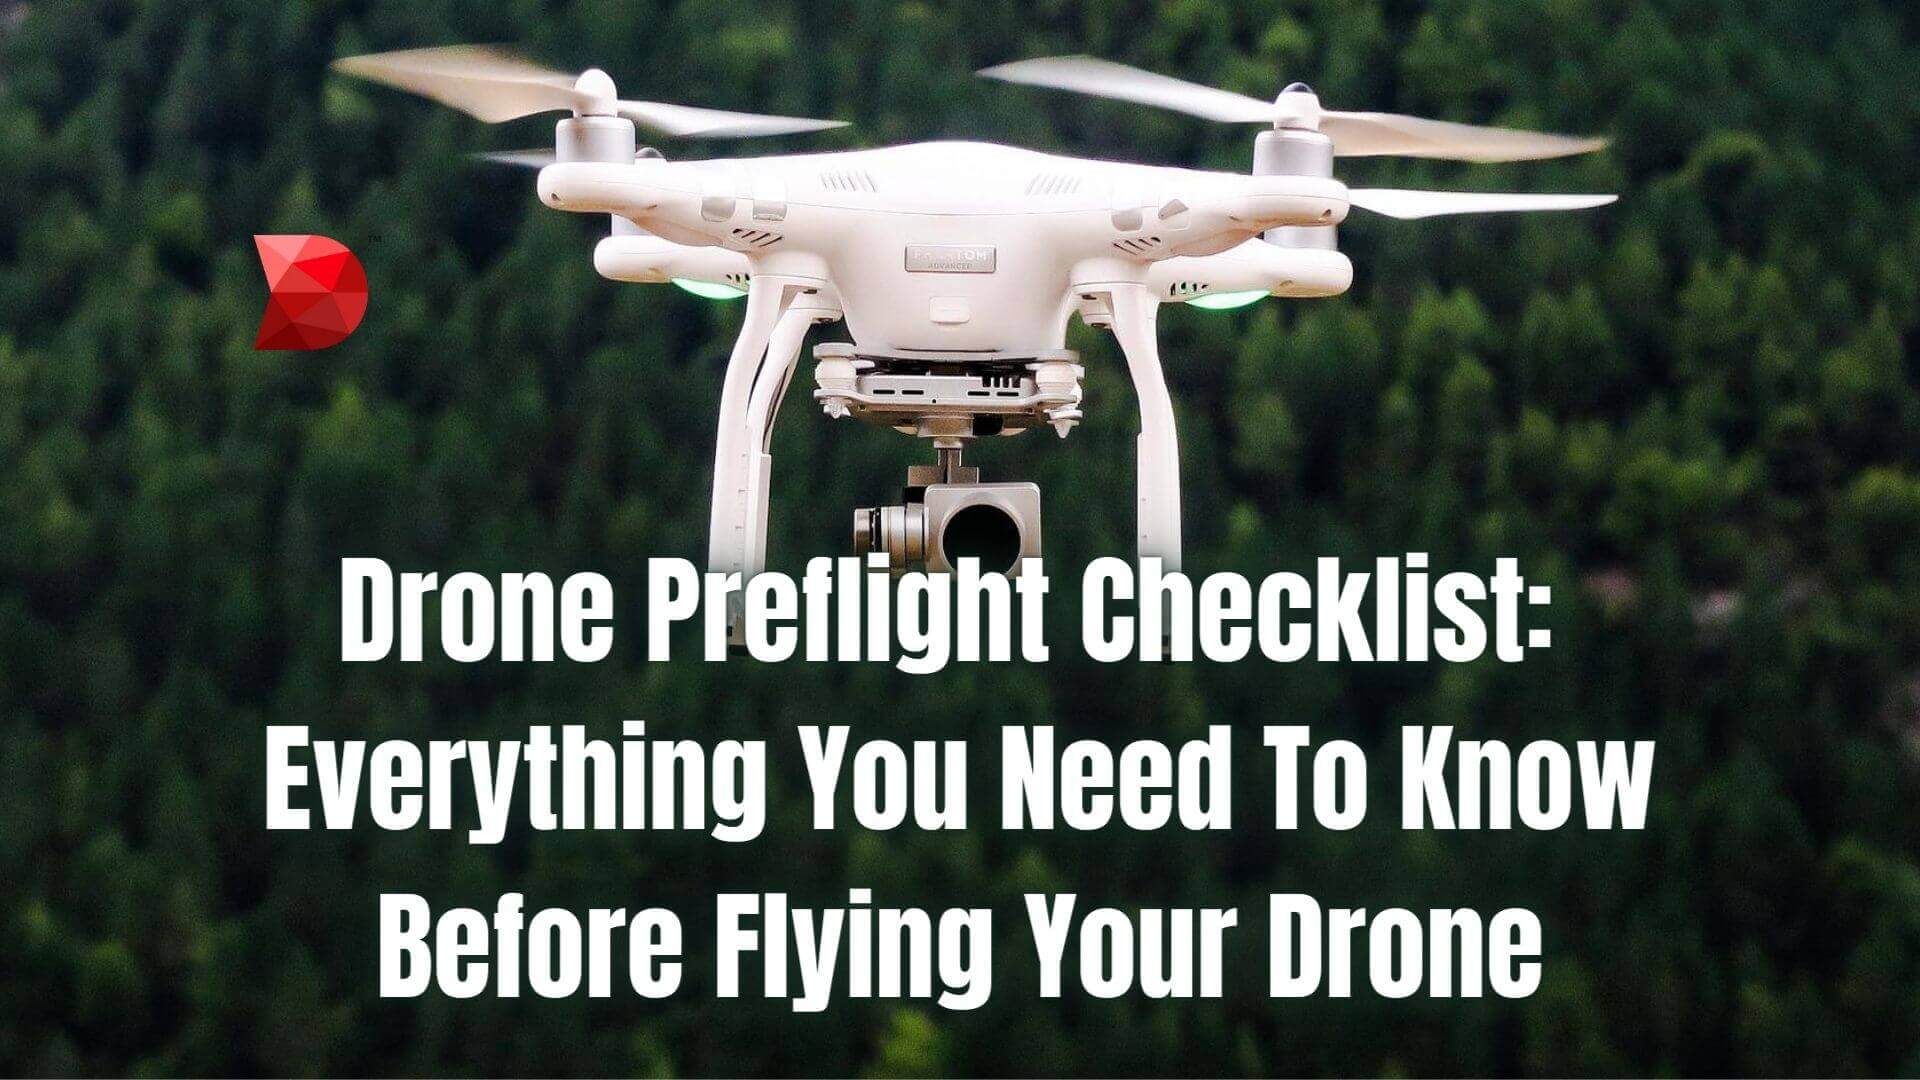 Drone Preflight Checklist Everything You Need To Know Before Flying Your Drone